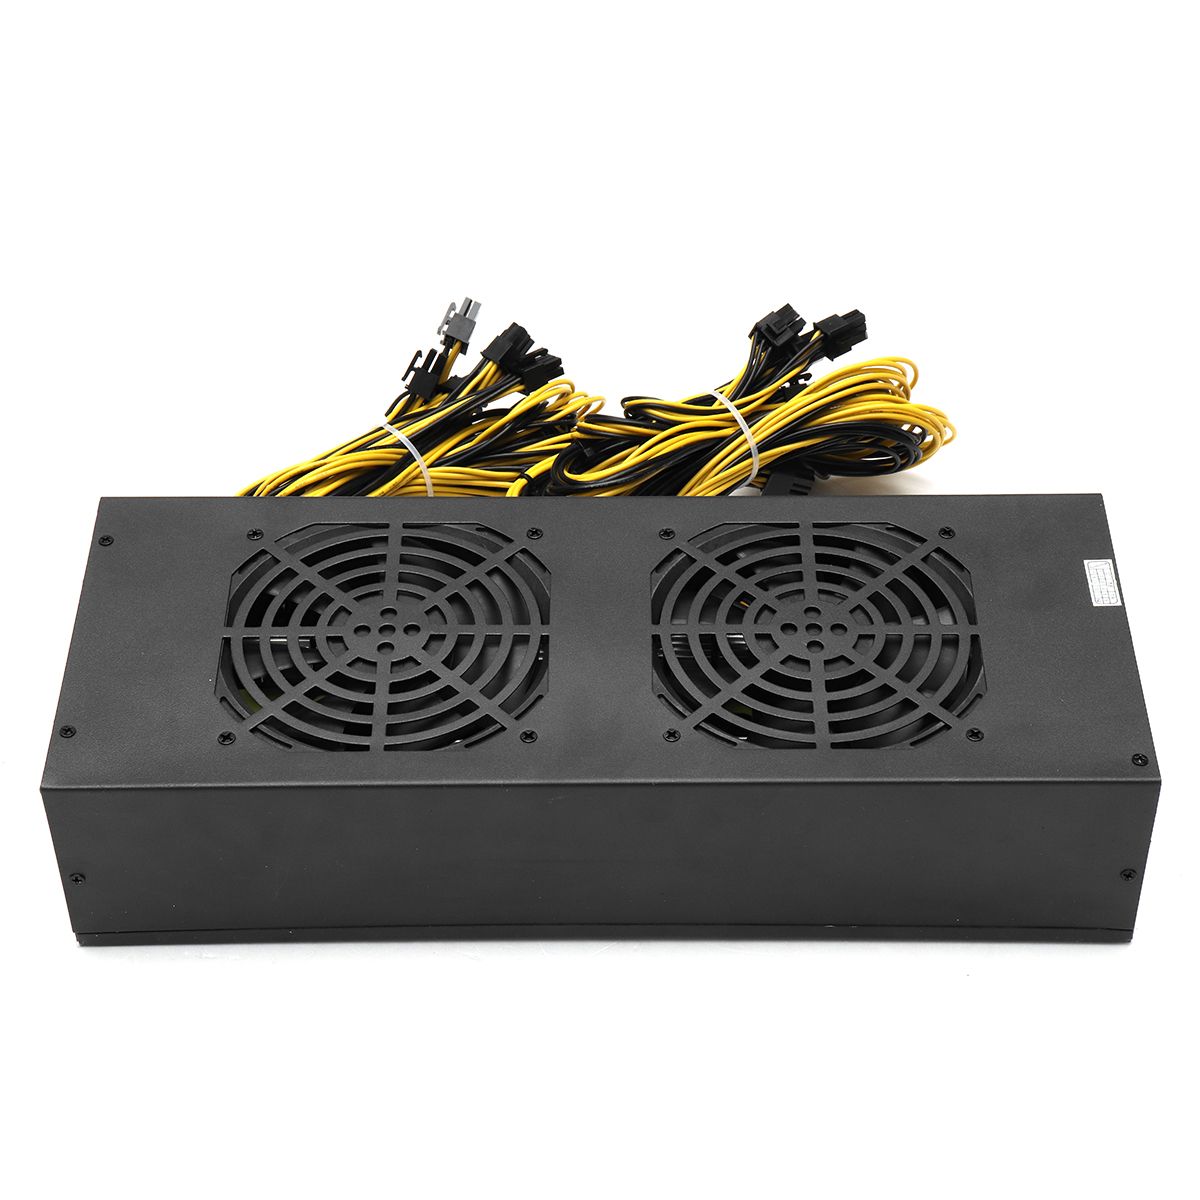 3600W-Miner-Mining-Power-Supply-Mining-Rig-Machine-with-Four-Fans-For-A6-A7-s5-s7-B3-E9-L3-R4-Miner-1243747